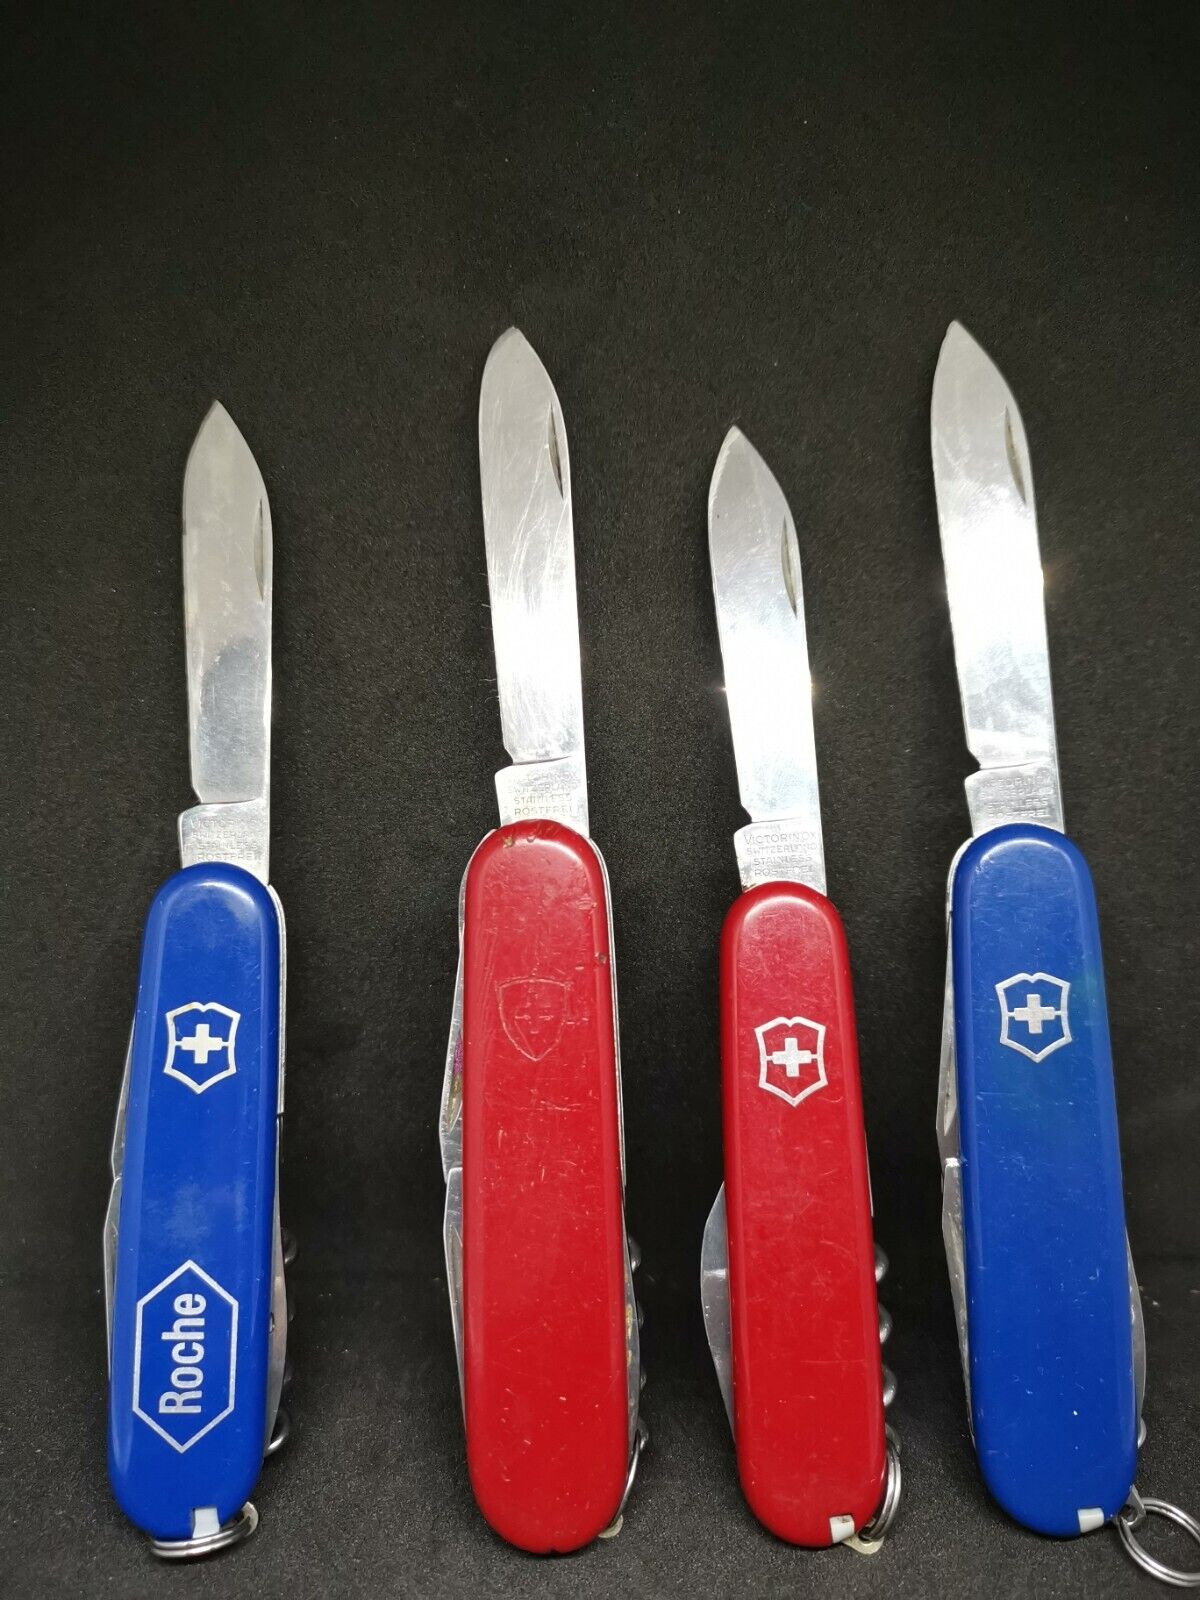  5 Victorinox rostfrei Officier Suisse knives in blue and red Swi Knife  vintage